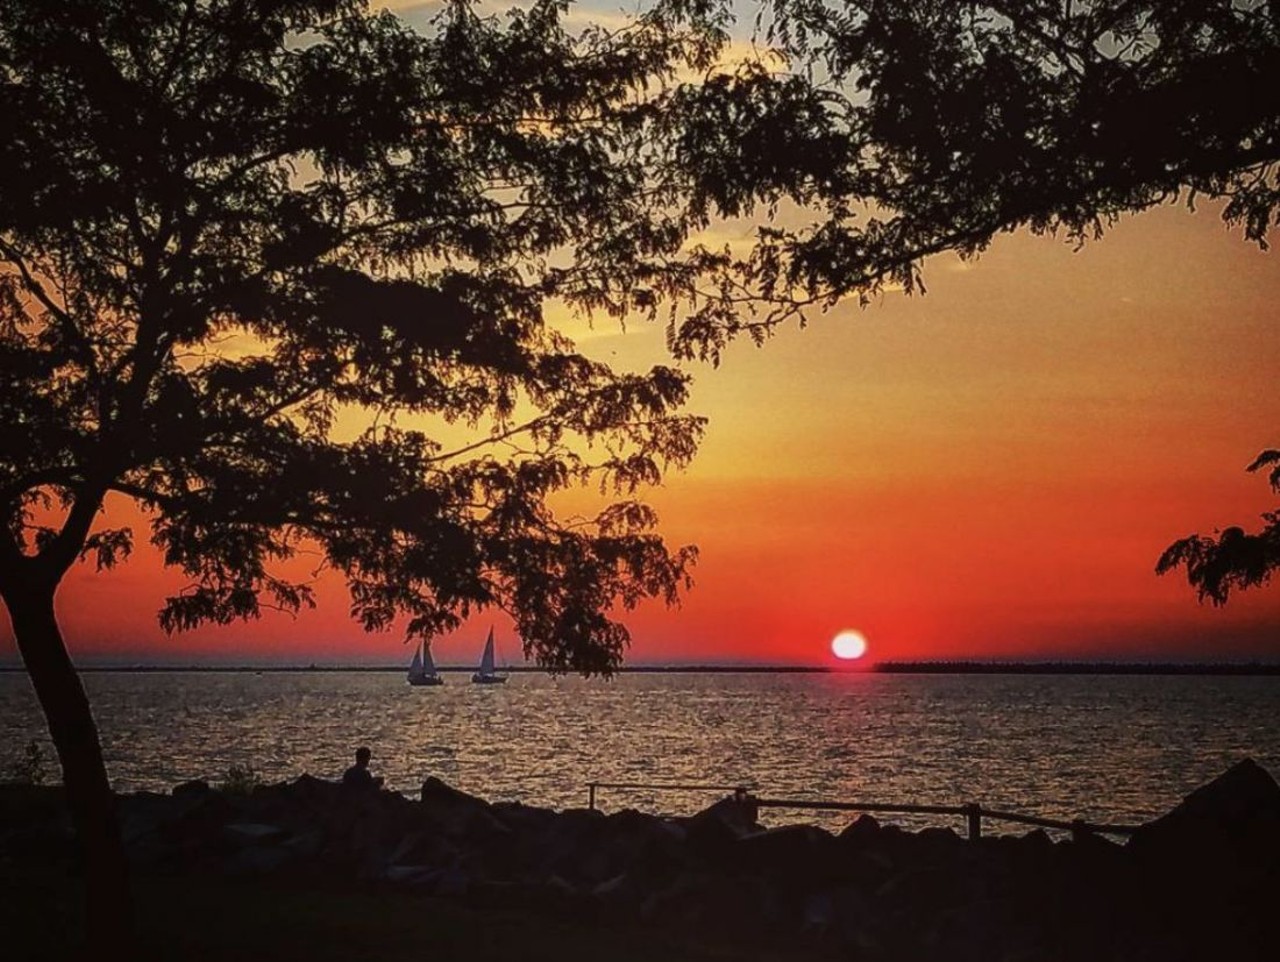 E55 On The Lake
5555 North Marginal Road, Cleveland
Cleveland Metroparks has totally revived this beautiful lookout point of Lake Erie by adding a bar, restaurant and bait shop to this spot. There&#146;s also live music on Saturdays and some of the best views in town.
Photo via @WonderWoman415/Instagram